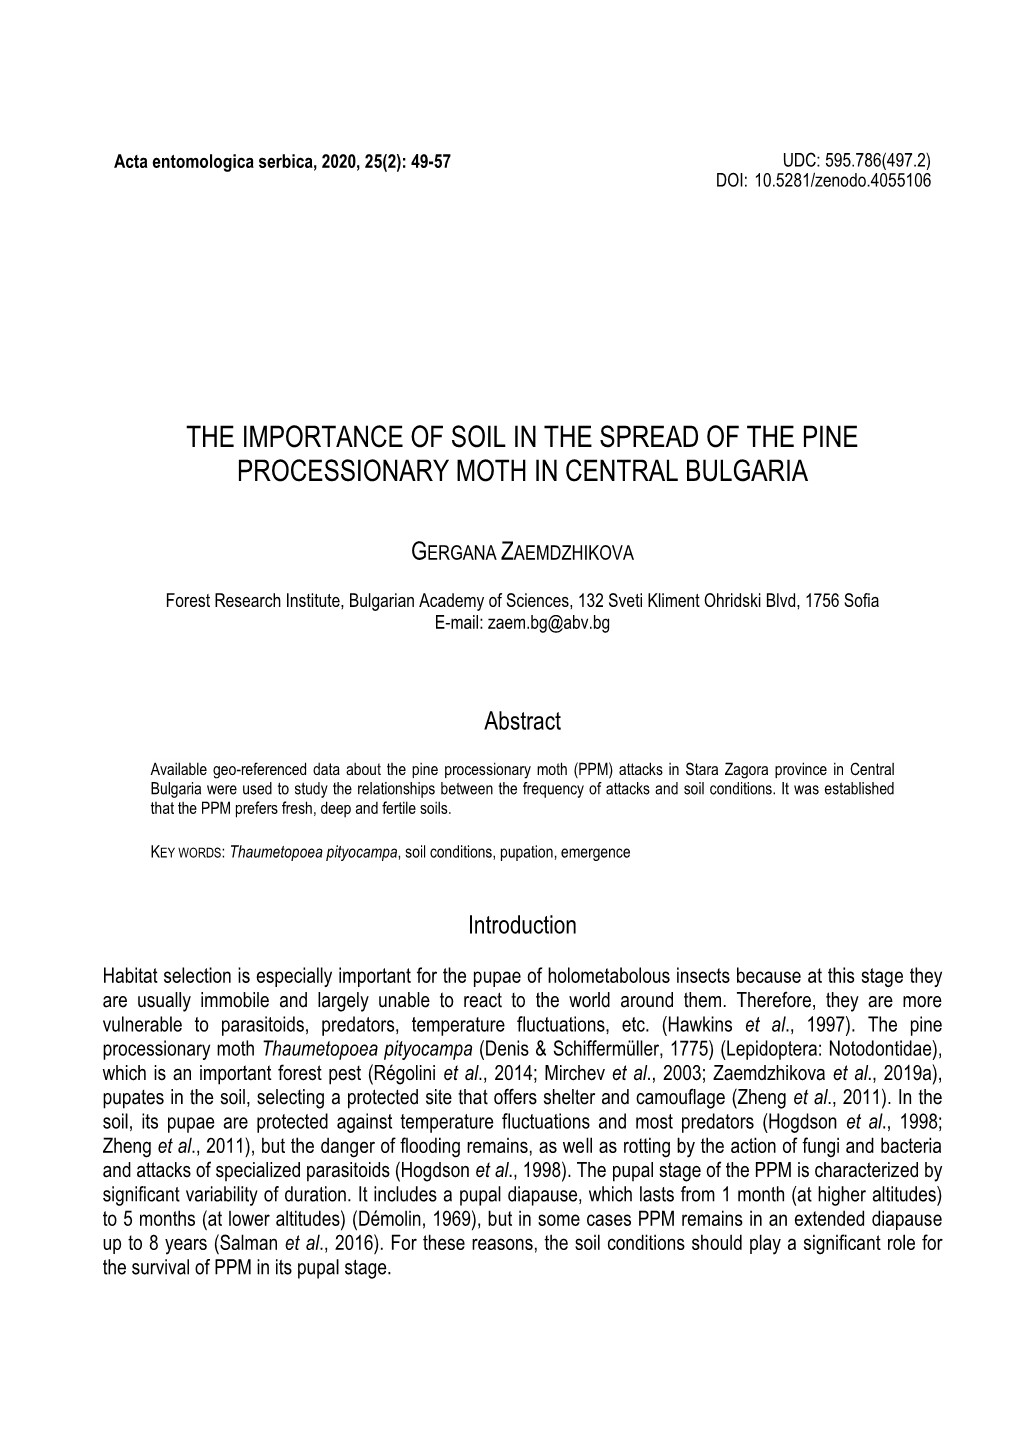 The Importance of Soil in the Spread of the Pine Processionary Moth in Central Bulgaria